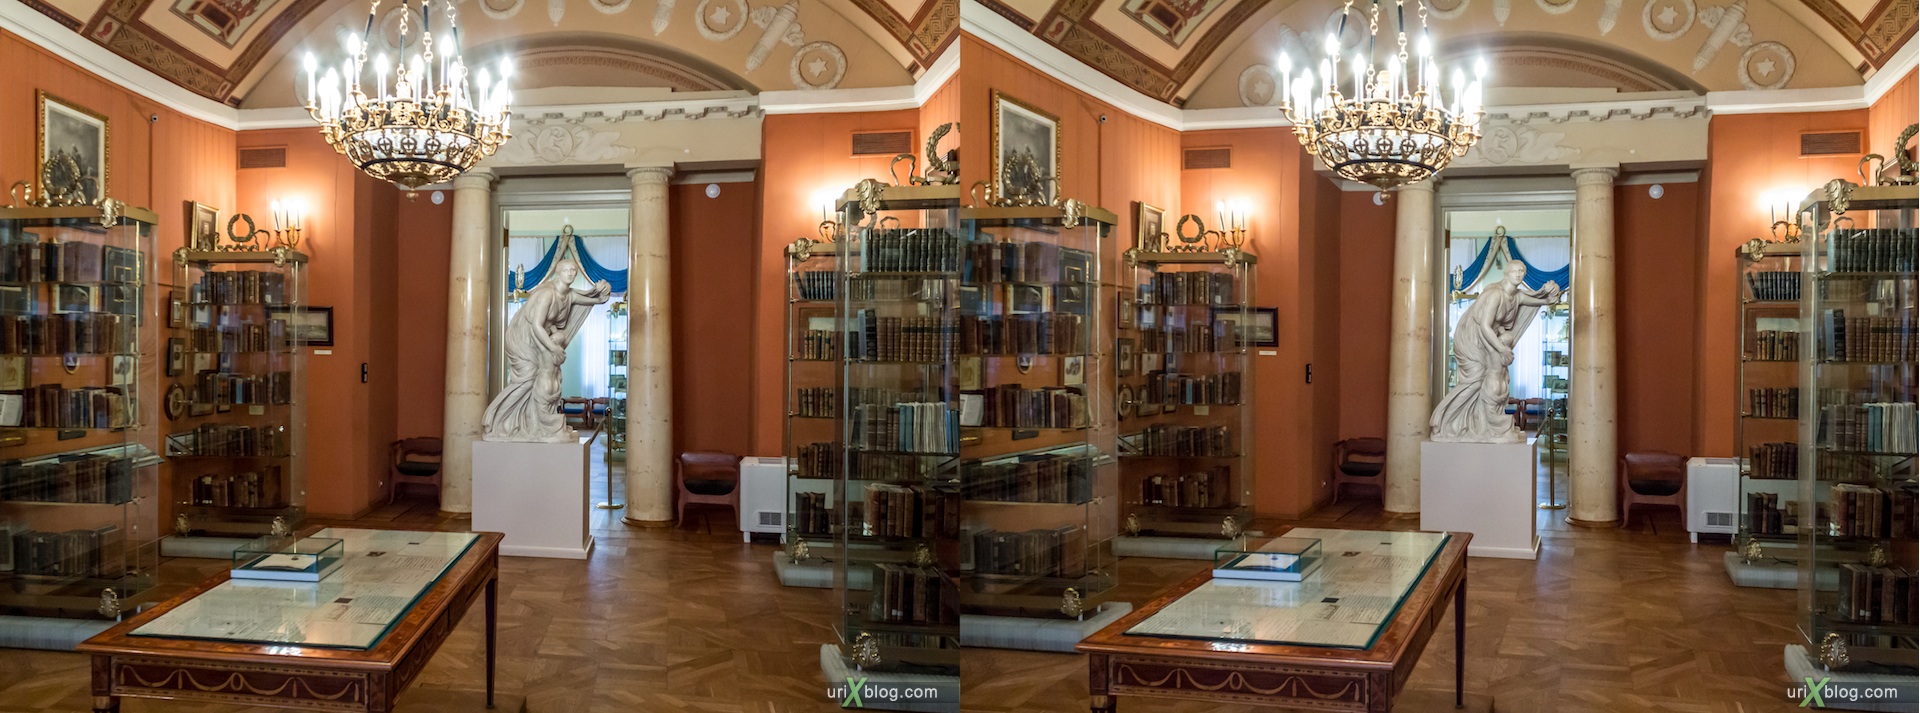 2013, Pushkin museum, estate of Khrushchev-Seleznyov, Moscow, Russia, 3D, stereo pair, cross-eyed, crossview, cross view stereo pair